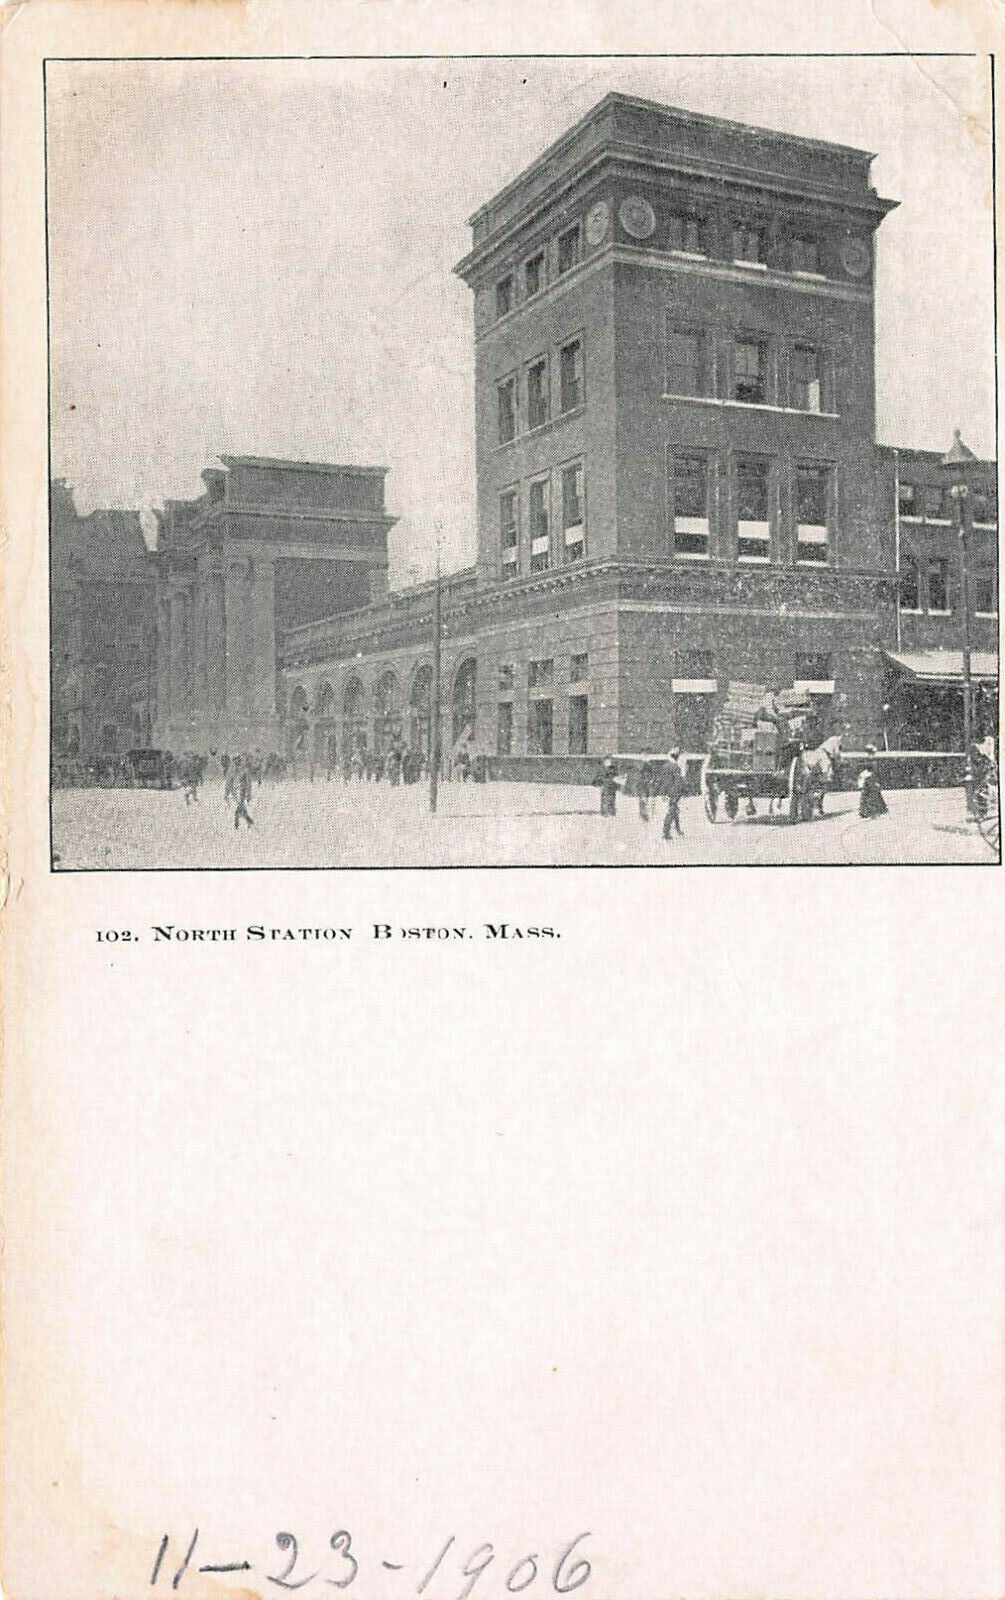 North Station, Boston, Massachusetts, Early Postcard, Used in 1906